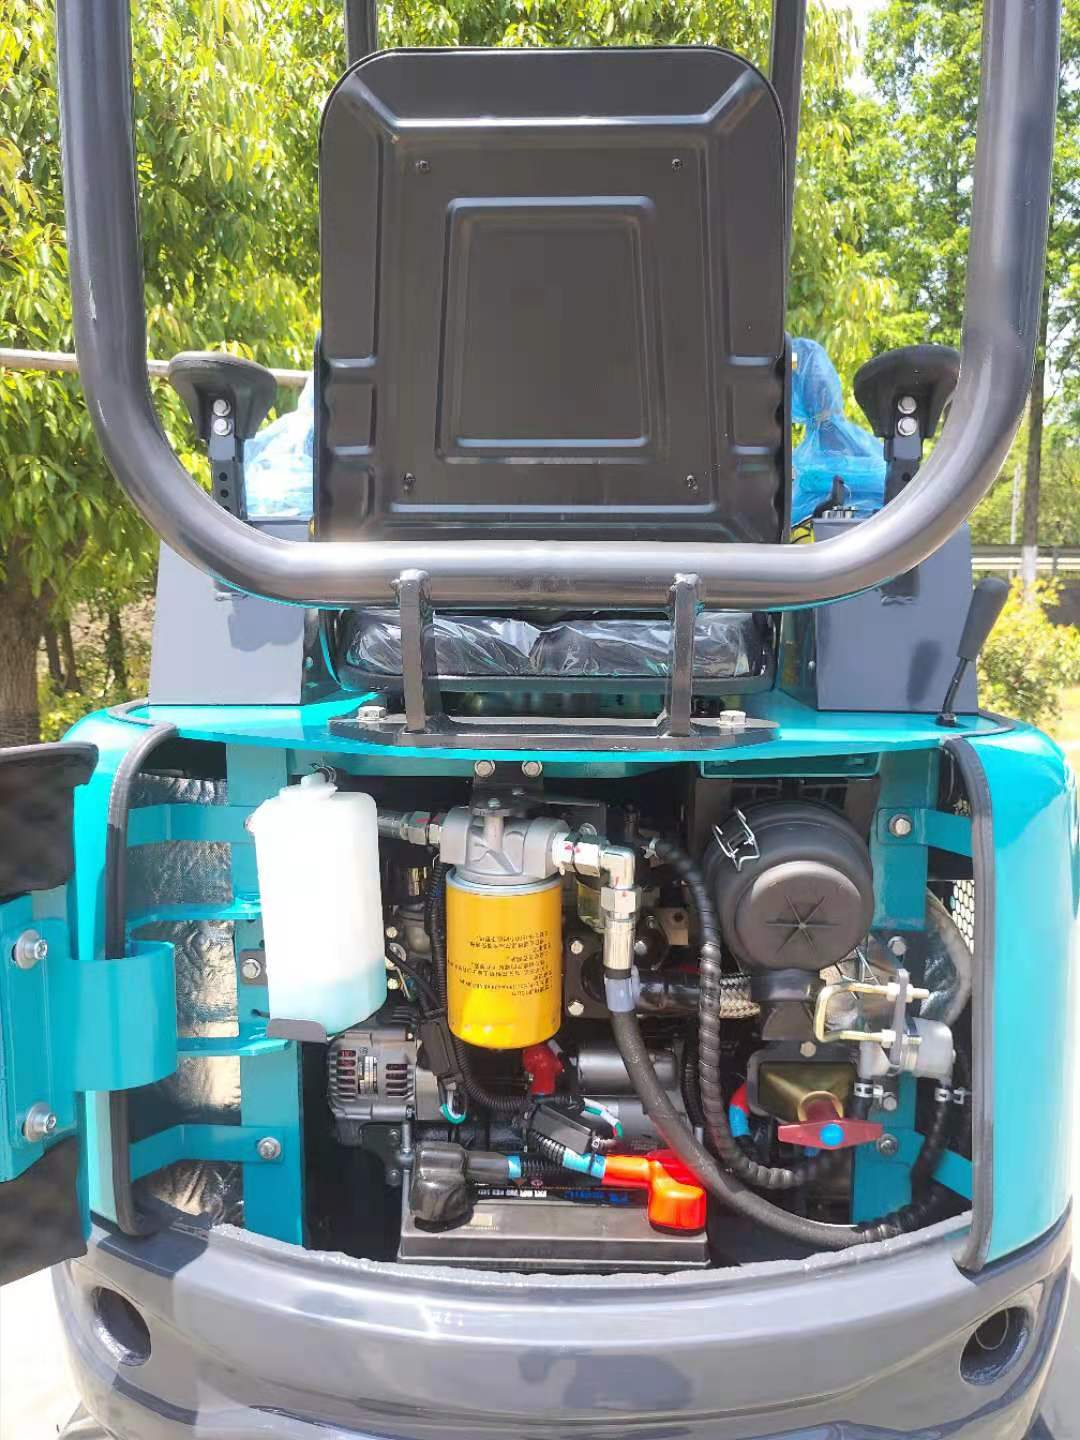 The New model with perkins engine which is popular in UK